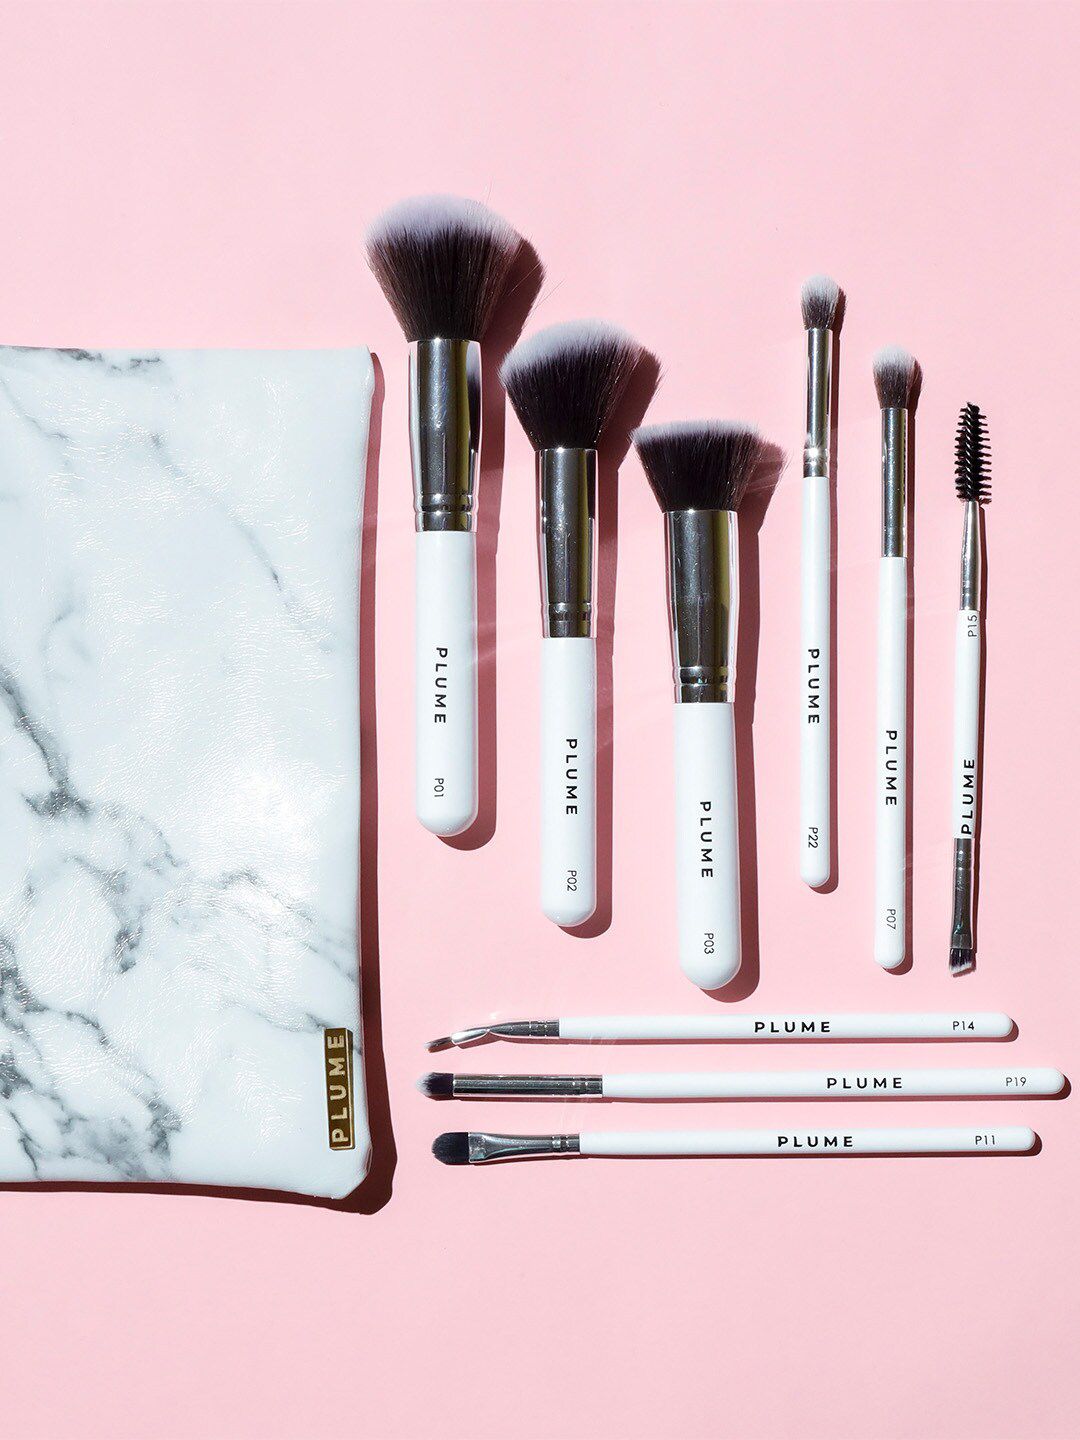 Plume Set of 9 Professional Makeup Brush with Marbelicious Makeup Pouch Price in India